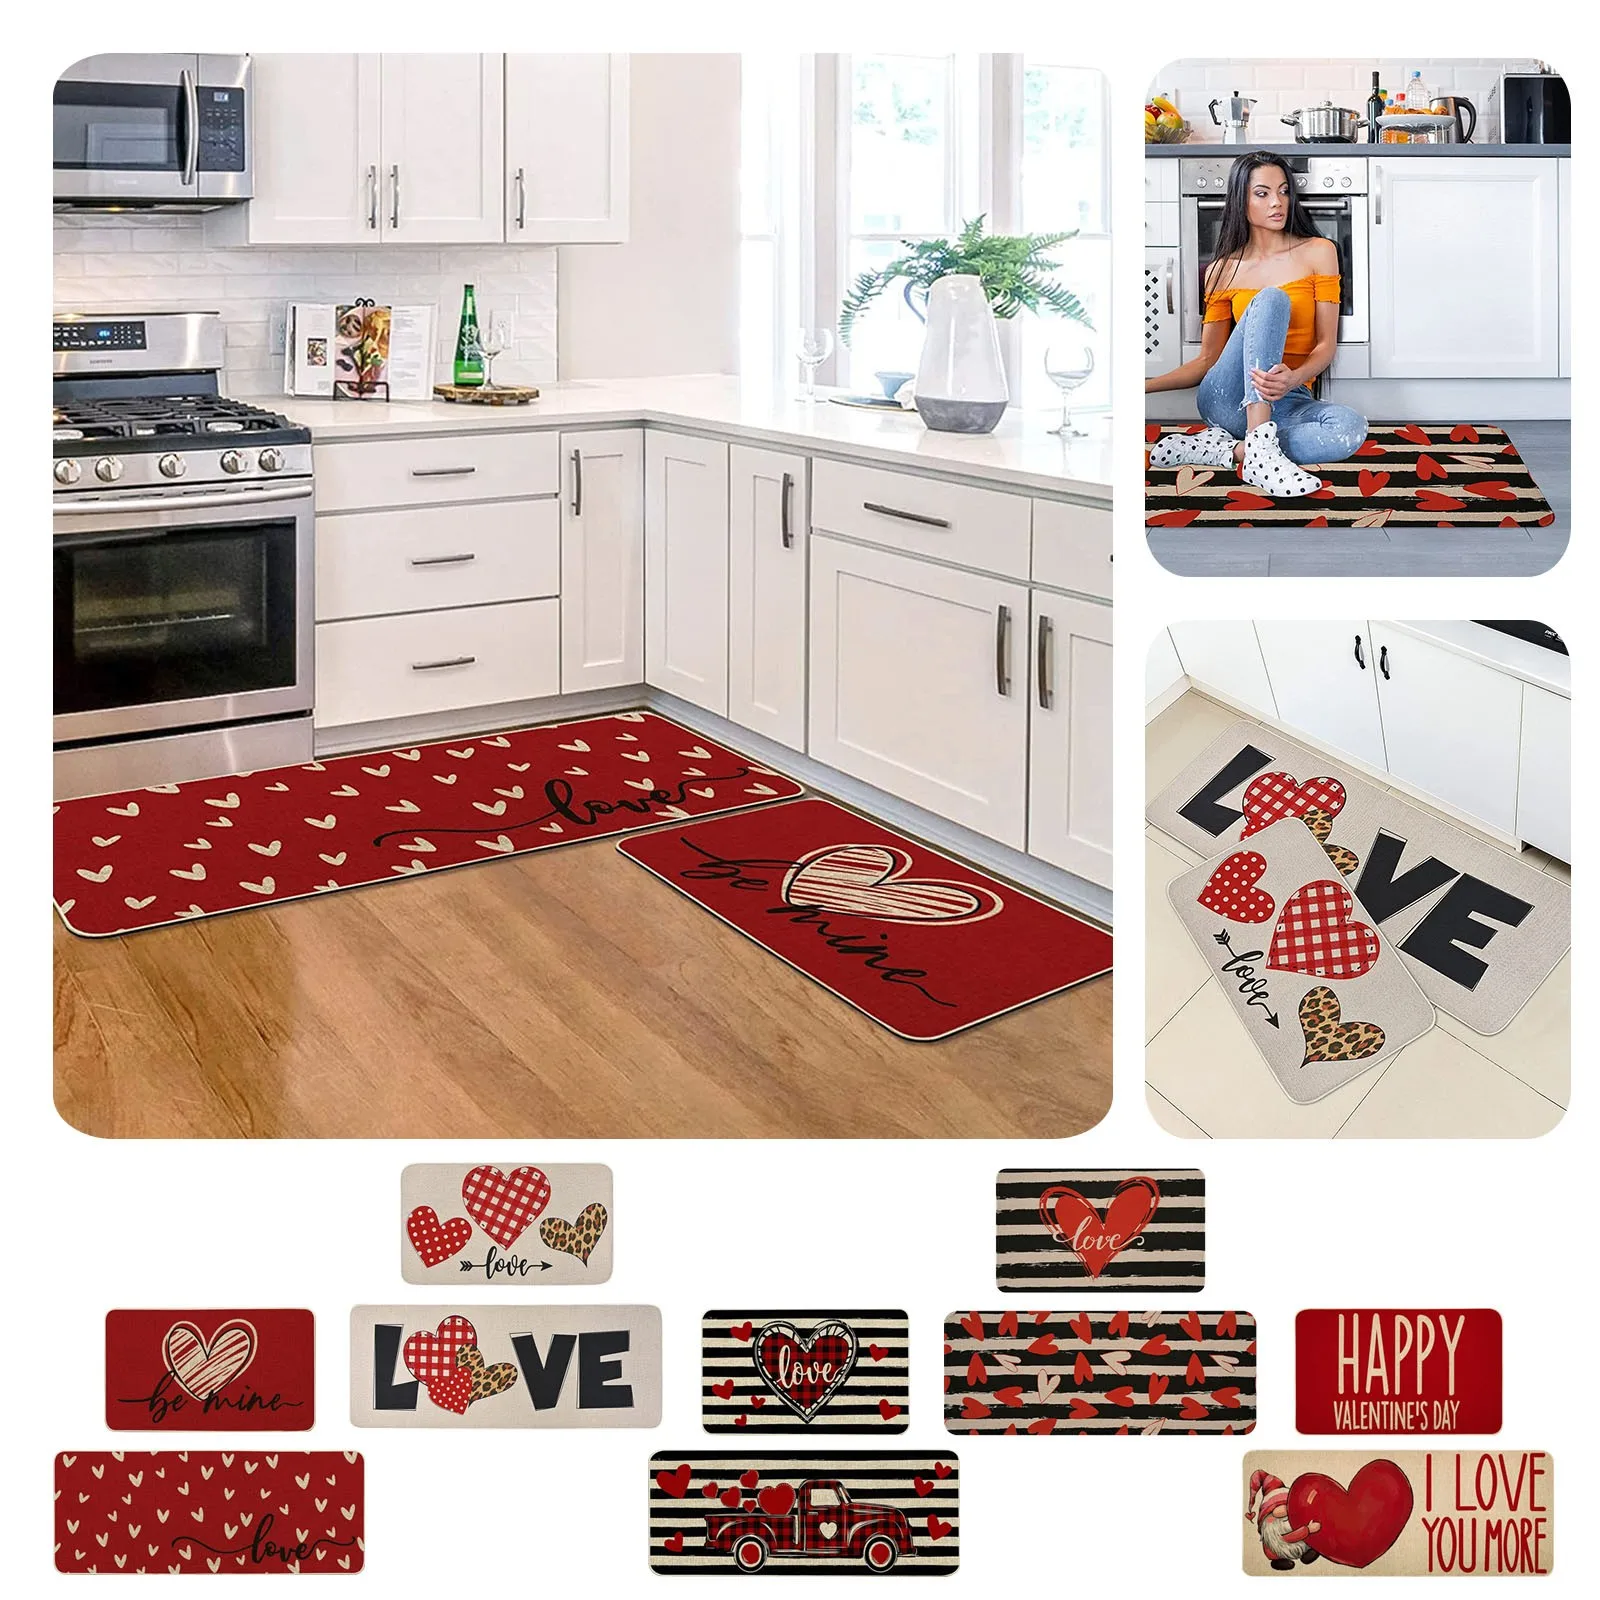 https://ae01.alicdn.com/kf/S4f43063a68c84f04a61f65cd1c1e39670/Valentine-s-Day-Rugs-And-Mats-Set-Of-2-Cushioned-Anti-Fatigue-Kitchen-Floor-Mat-Non.jpg